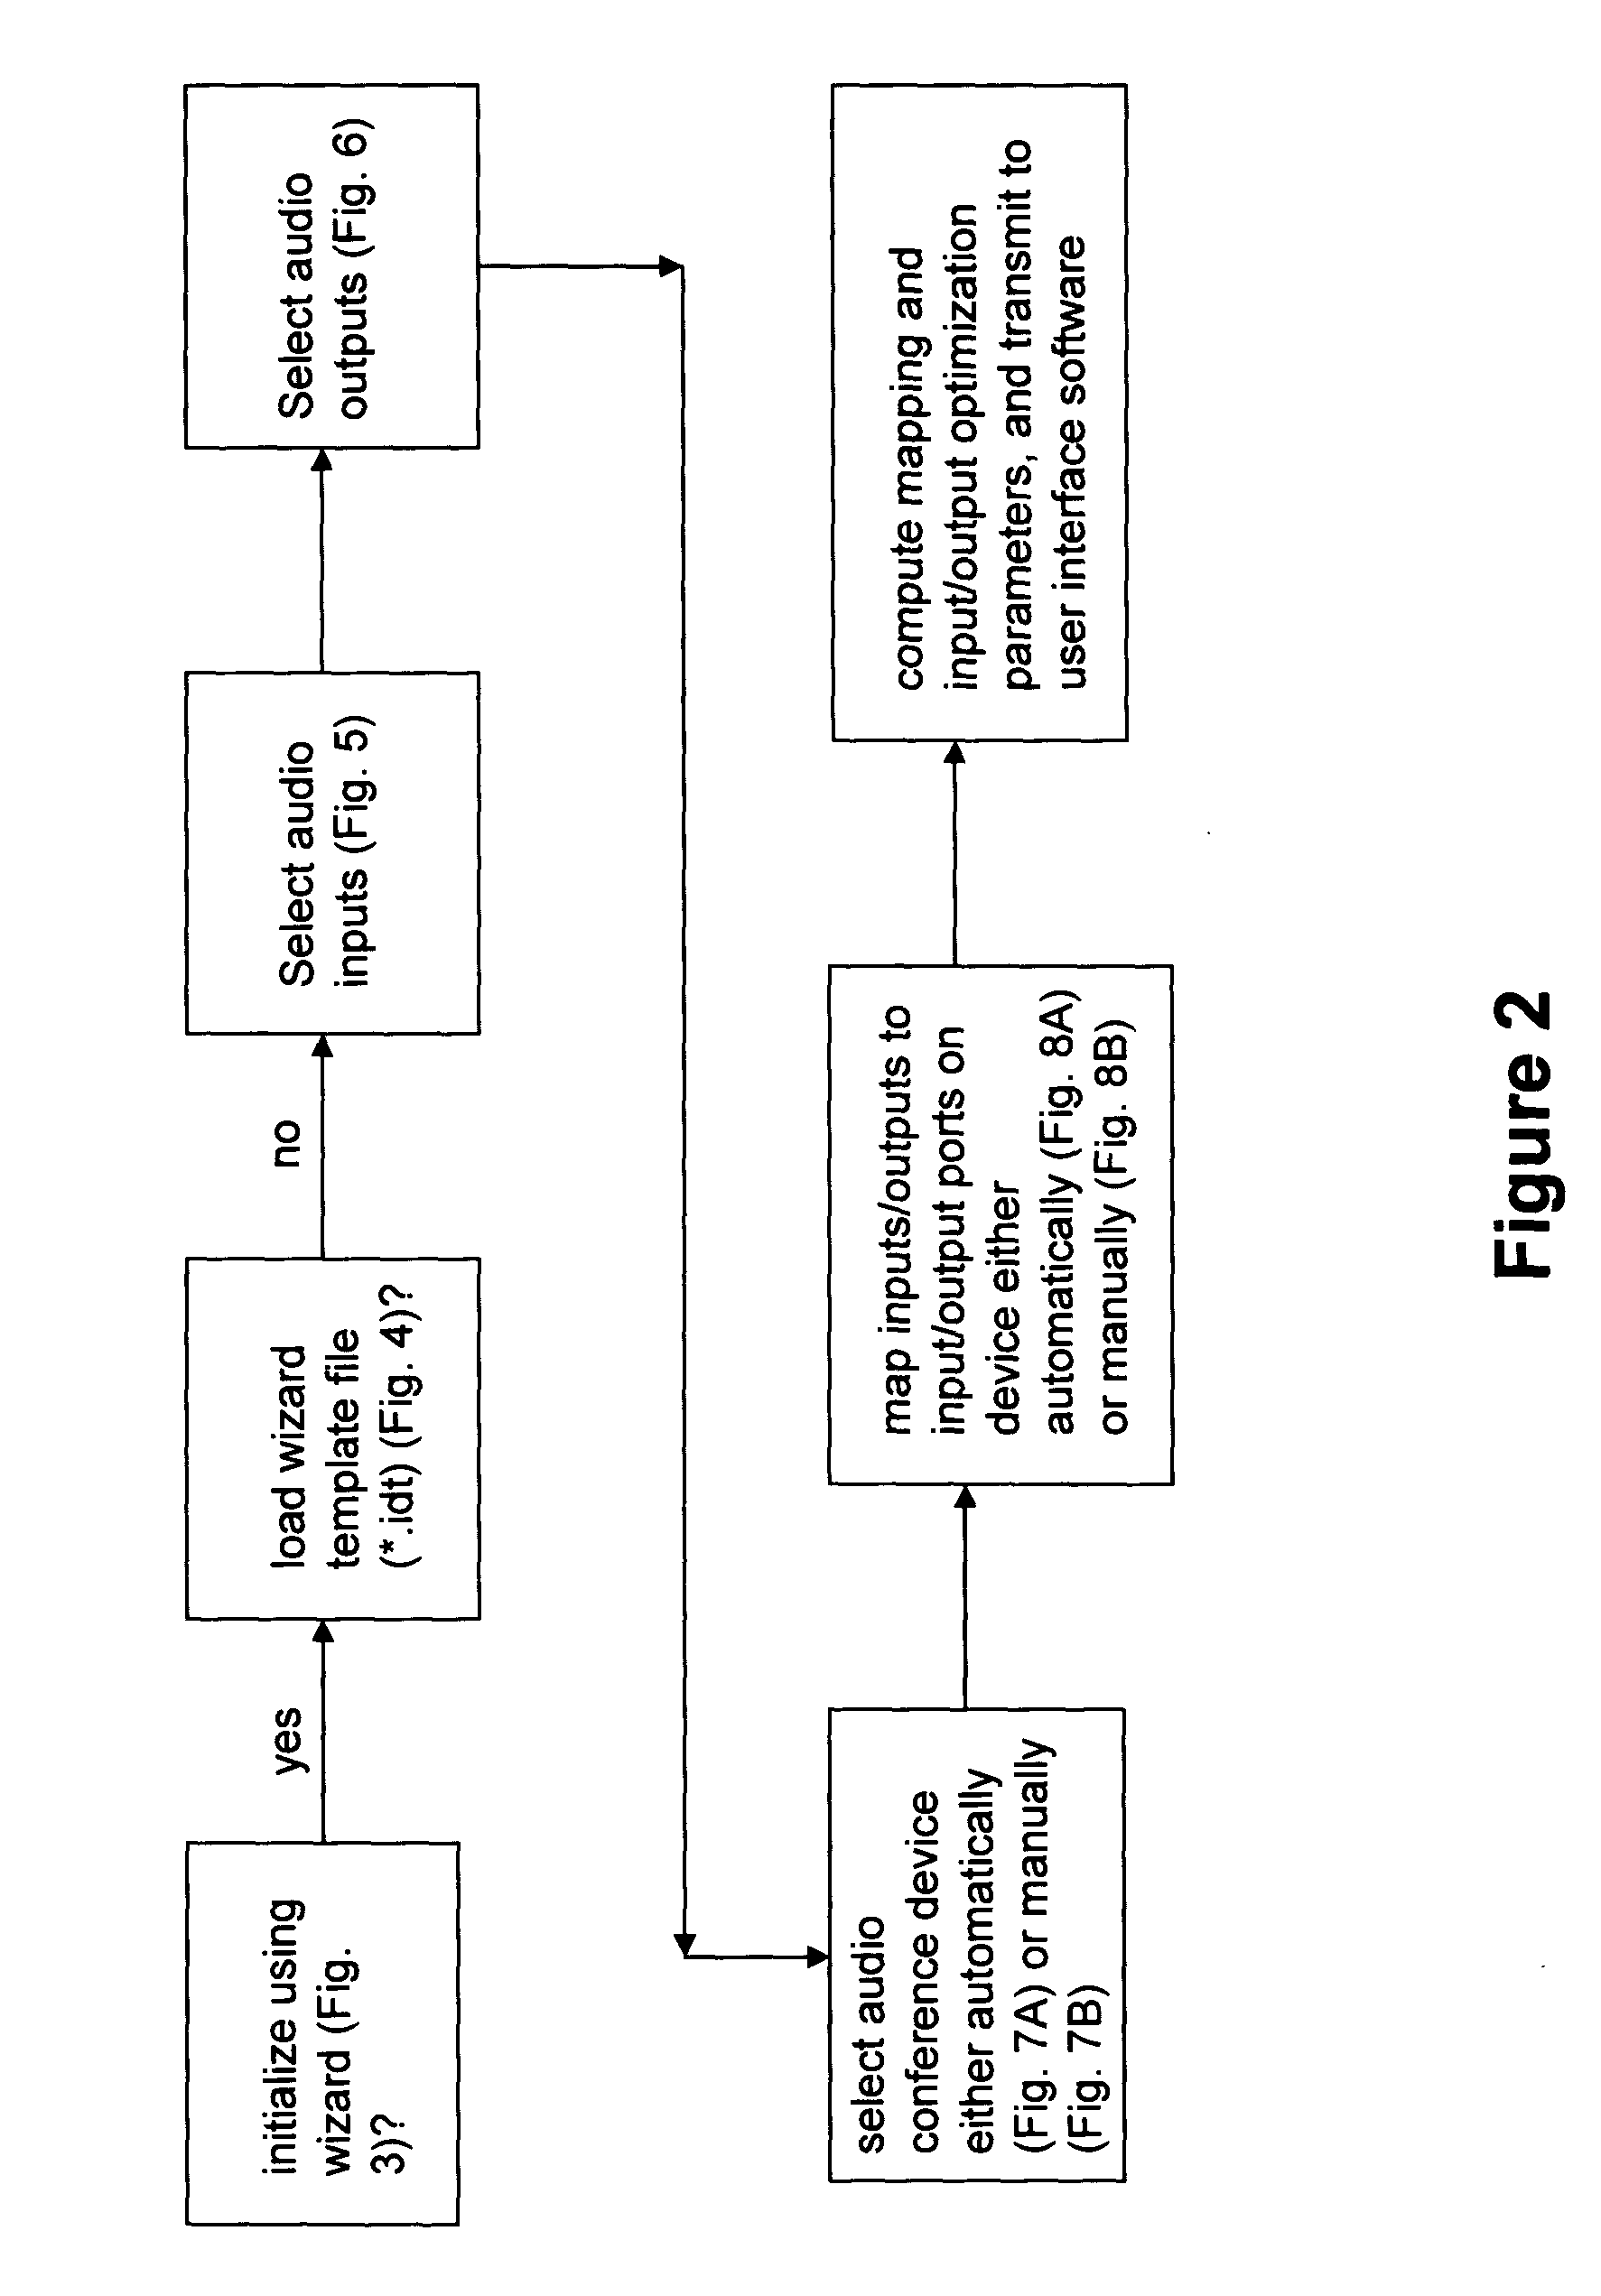 Computer program and methods for automatically initializing an audio controller